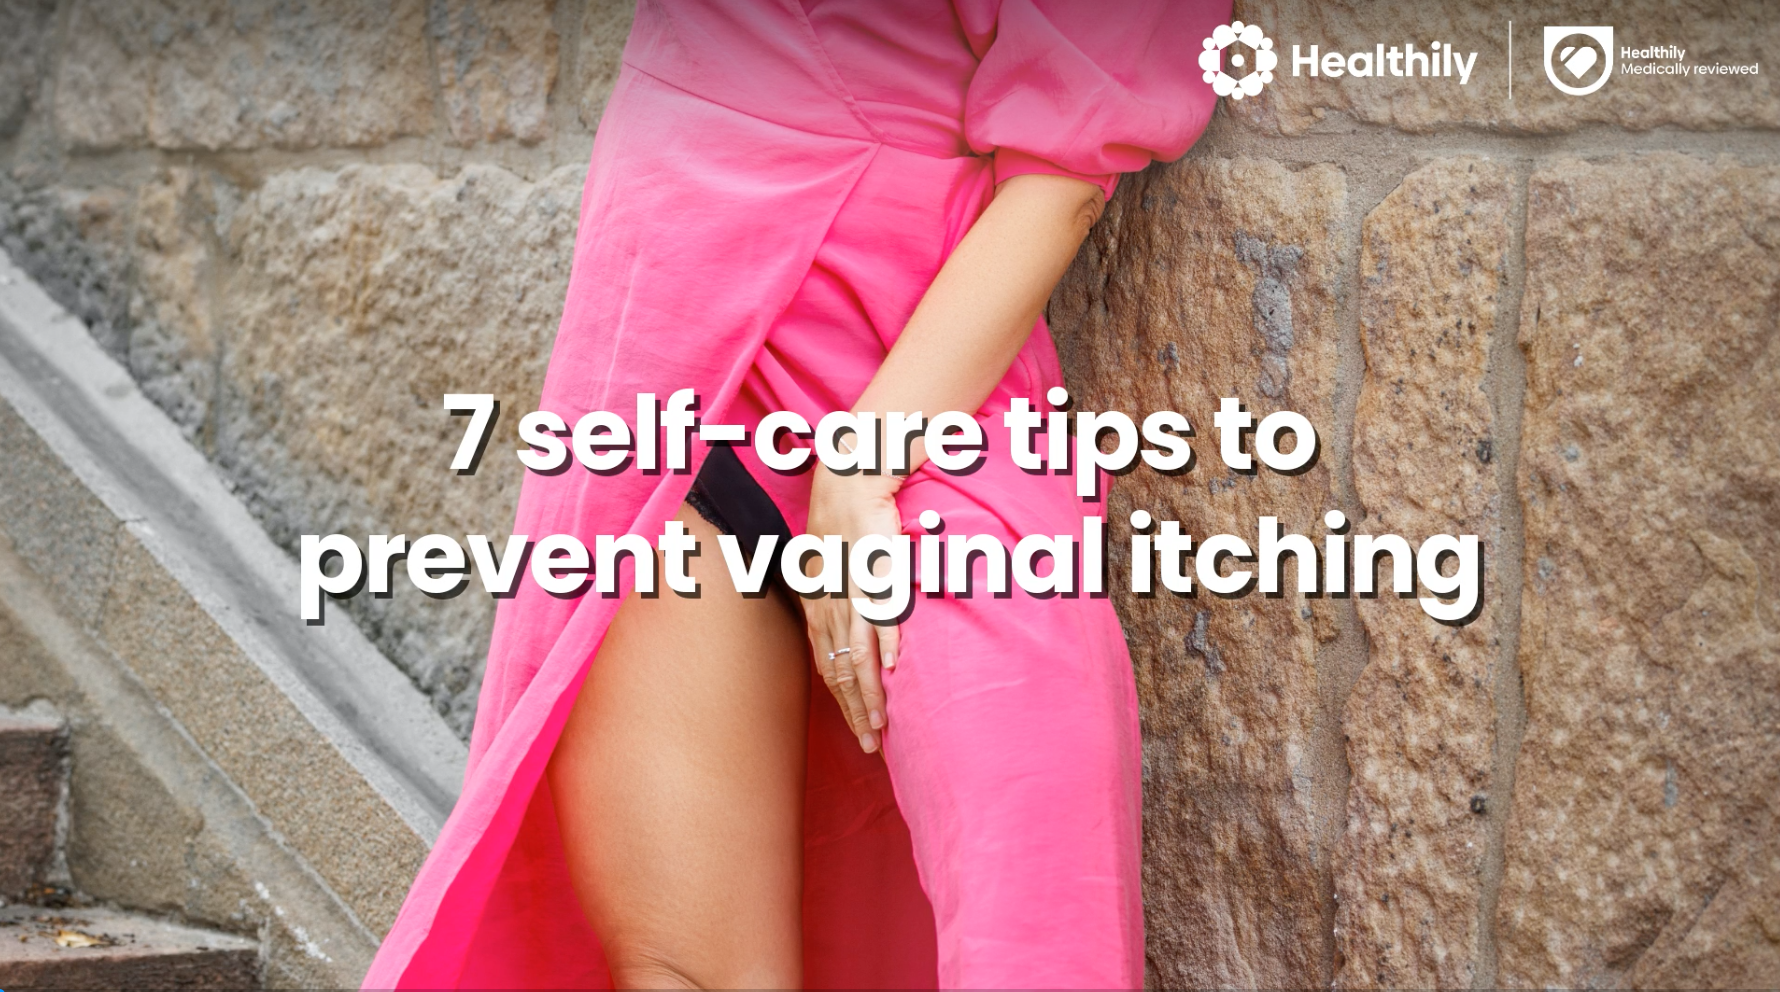 Vaginal itching home remedies to help stop and prevent it image picture